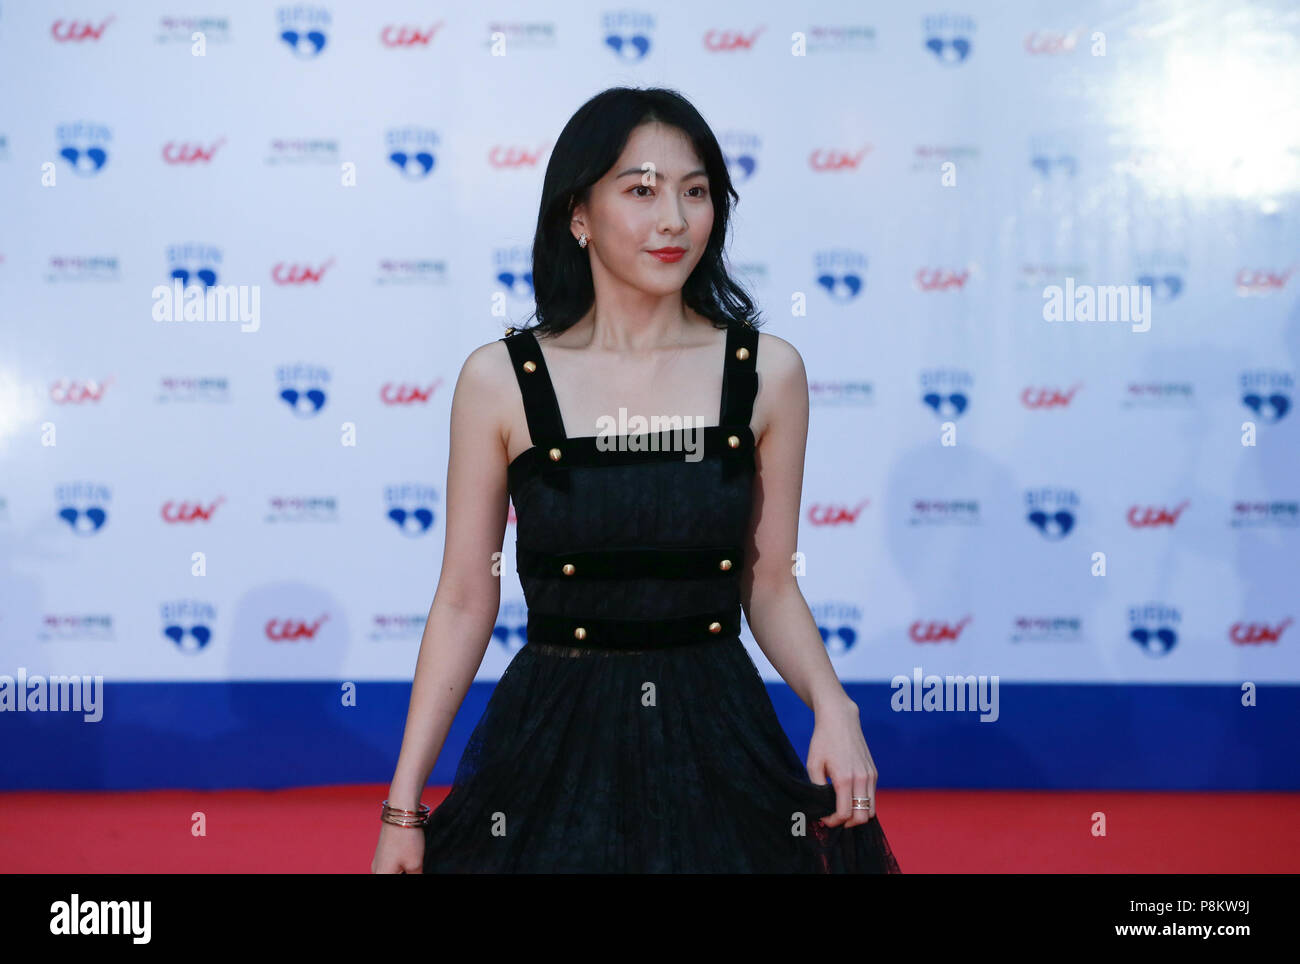 Bucheon, South Korea. 12th July, 2018. South Korean actress Kang Ji-young appears at the 22nd Bucheon International Fantastic Film Festival red carpet in Bucheon, South Korea, July 12, 2018. The 10-day 22nd Bucheon International Fantastic Film Festival, with its theme as 'Love, Fantasy and Adventure', kicked off here Thursday. Credit: Wang Jingqiang/Xinhua/Alamy Live News Stock Photo